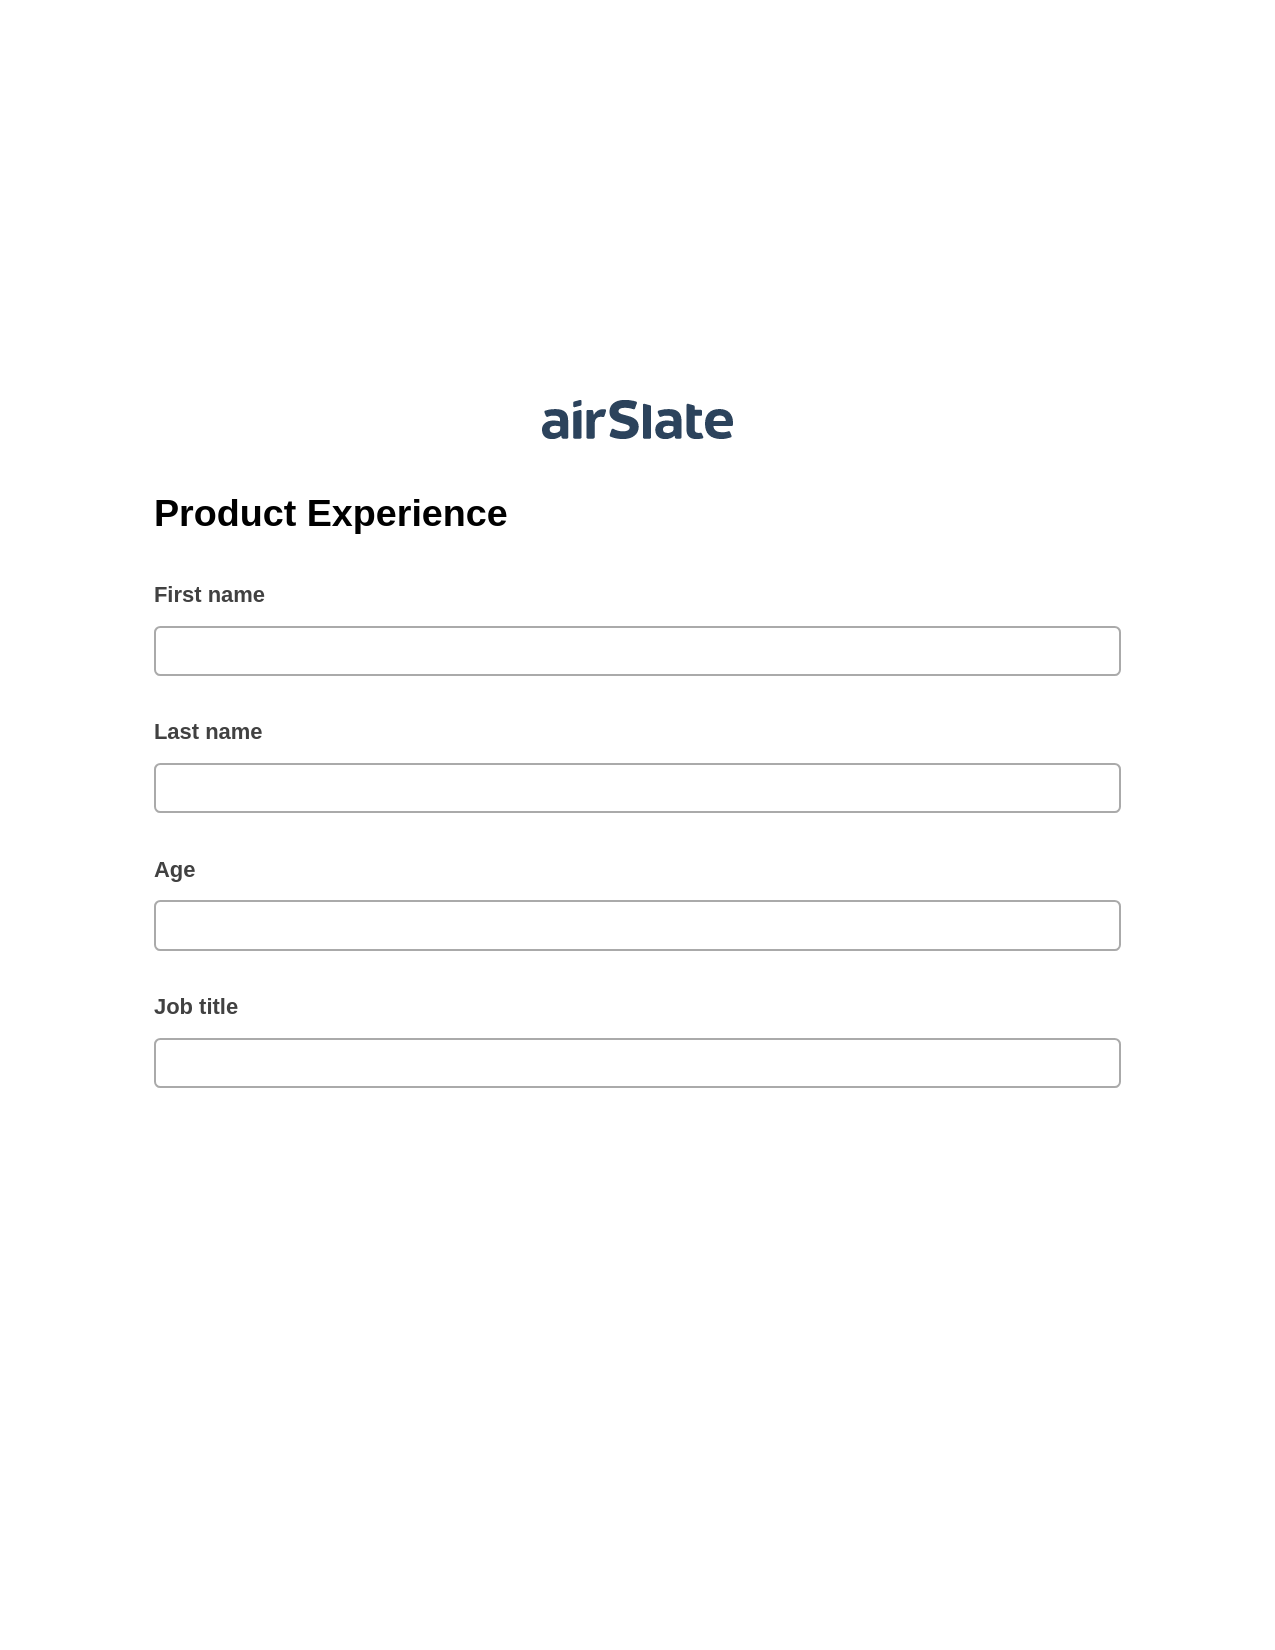 Multirole Product Experience Pre-fill from MS Dynamics 365 Records, Mailchimp add recipient to audience Bot, Export to Google Sheet Bot